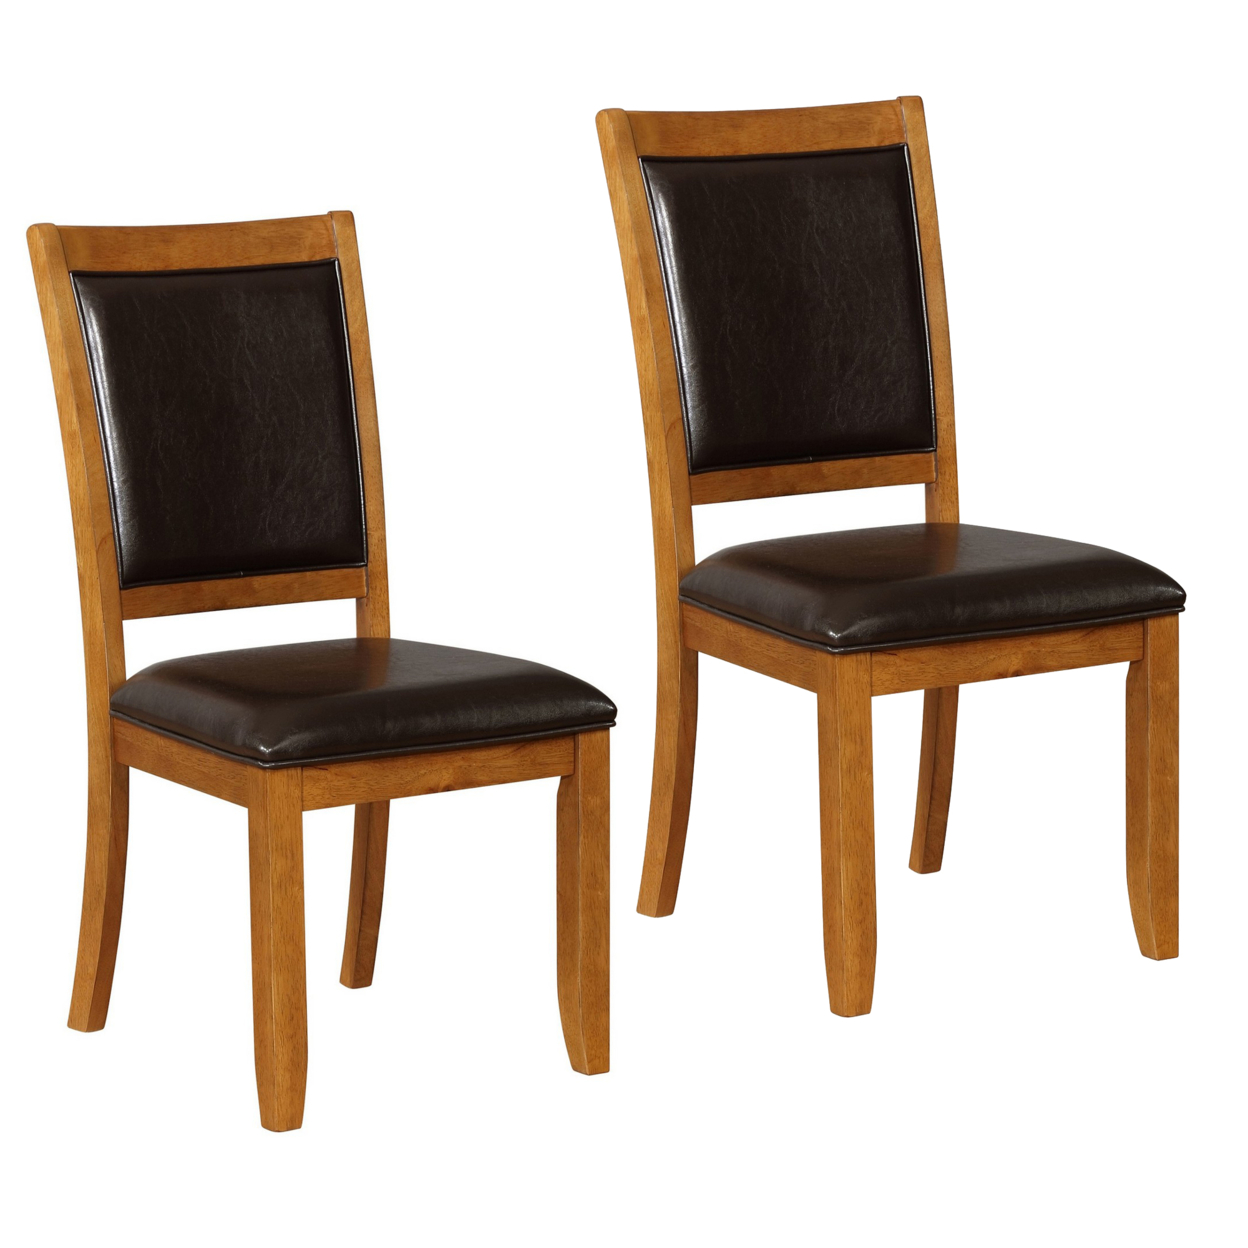 19 Inch Dining Chair, Set Of 2, Brown Wood Frame, Faux Leather Seating- Saltoro Sherpi